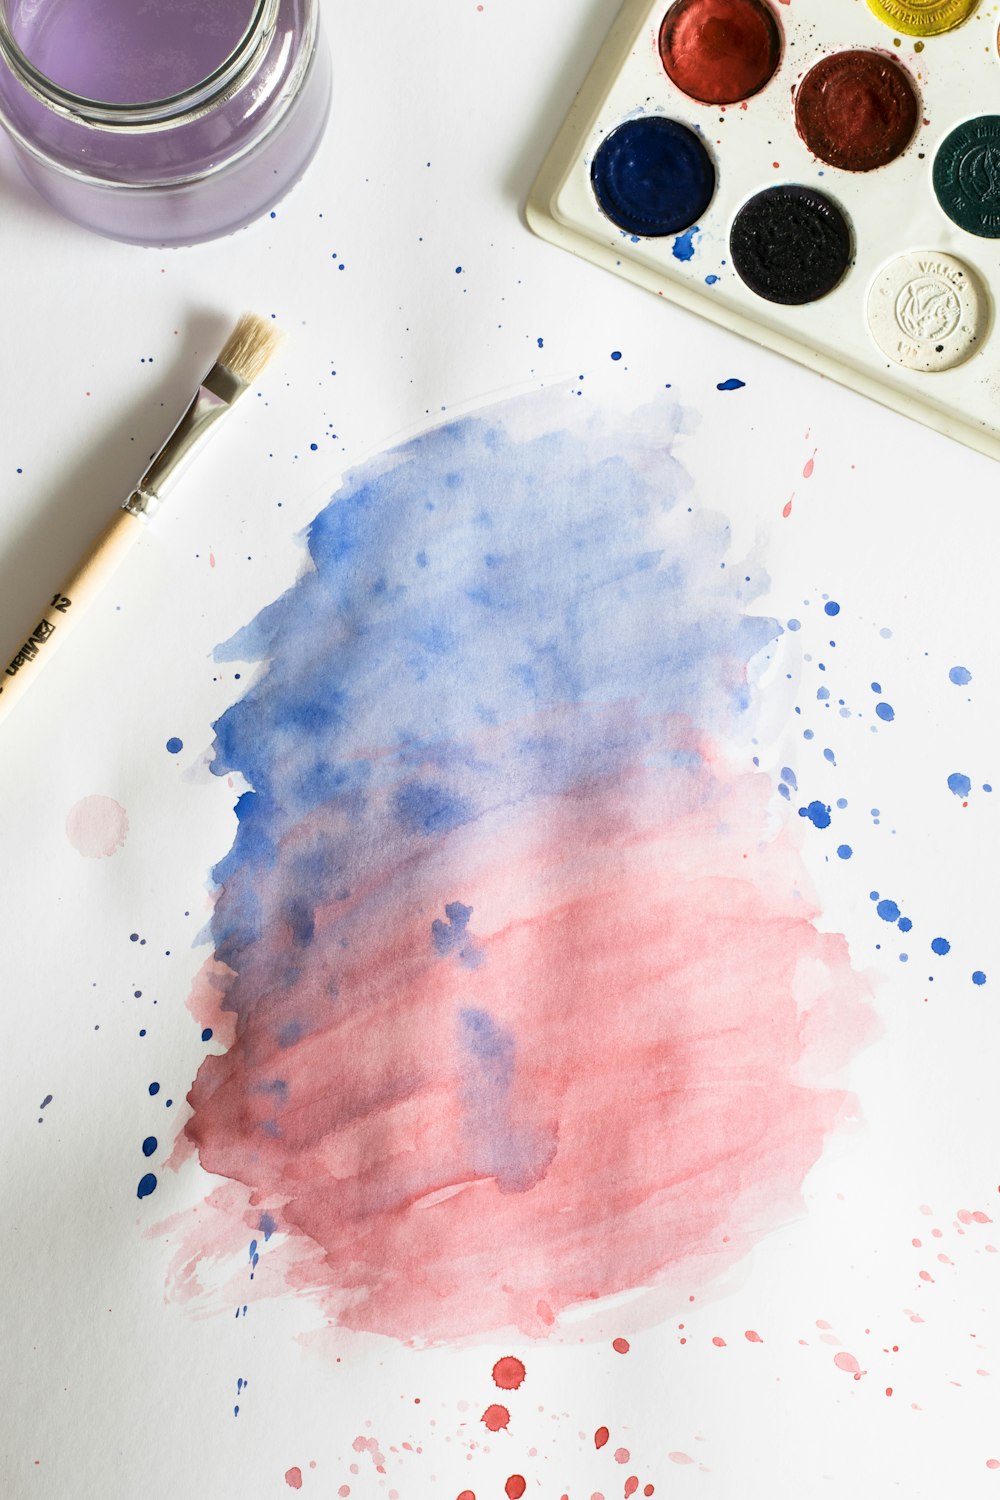 a watercolor painting of a red, white and blue cloud